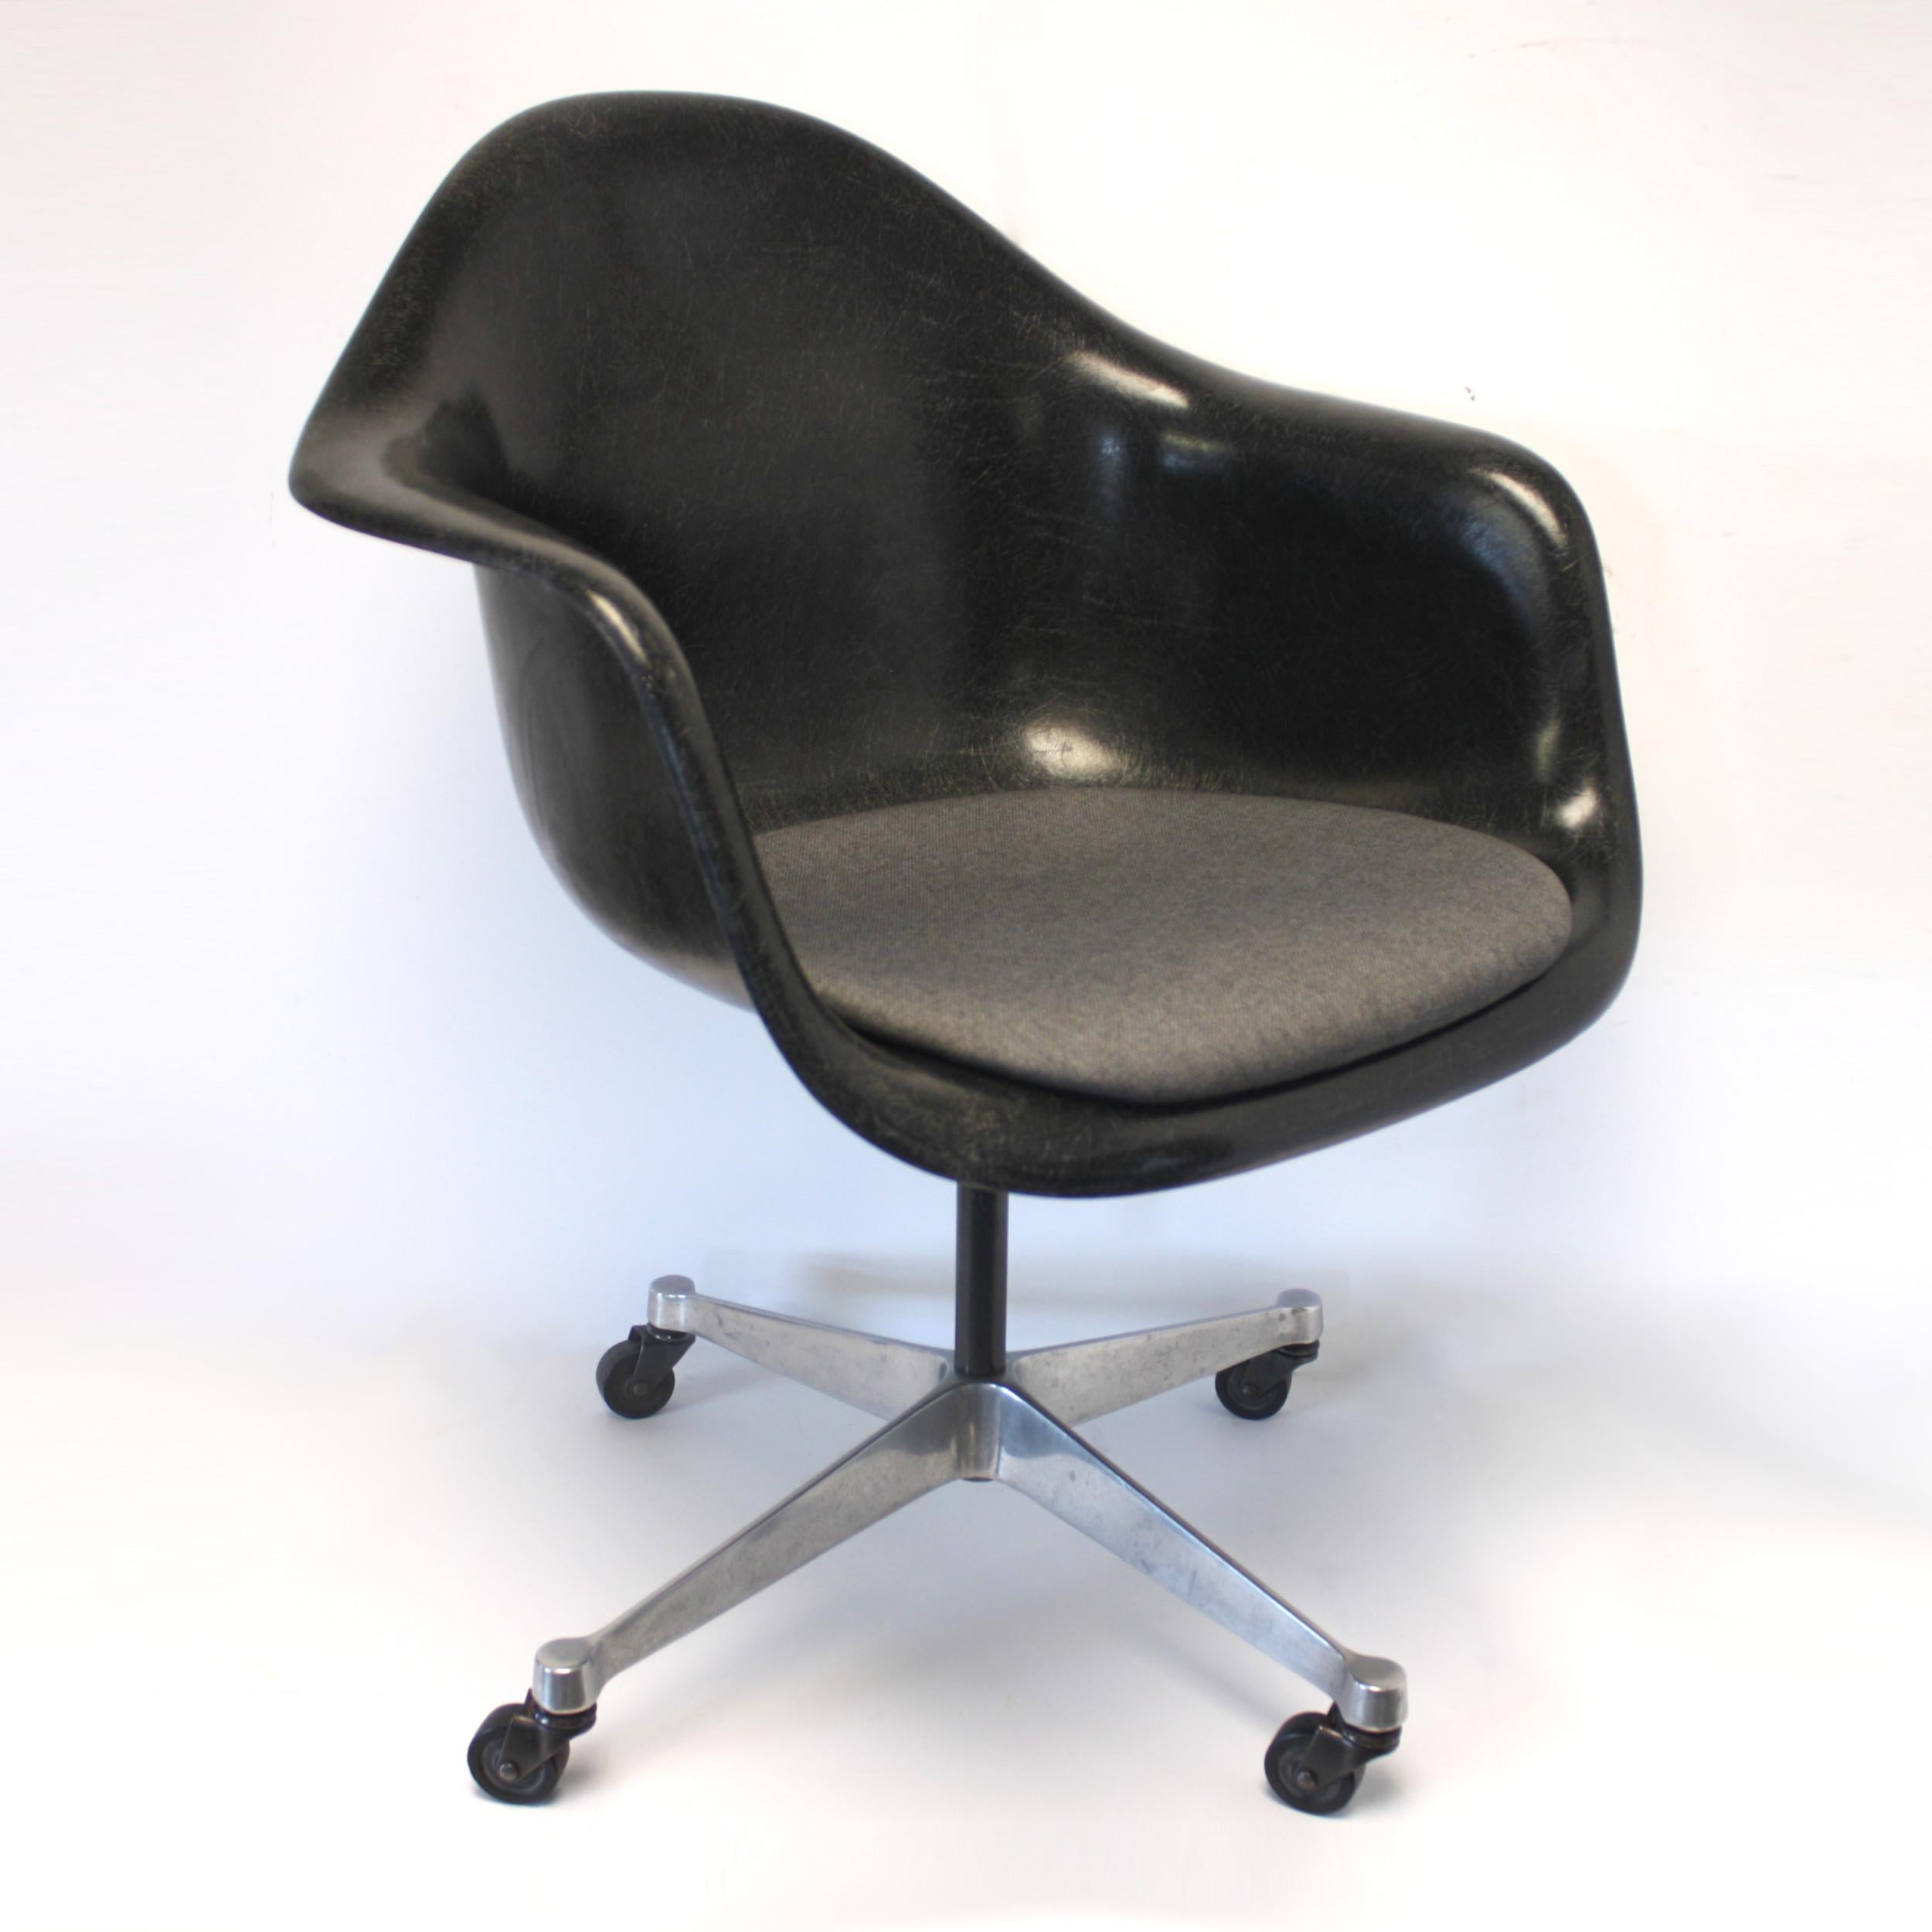 Original 1970s Herman Miller rolling desk chair. Chair features black fiberglass shell, polished aluminum rolling base, and brand-new, authentic Herman Miller seat cushion in Medley Charcoal fabric. Very comfy!

Chair arm height: 25.75